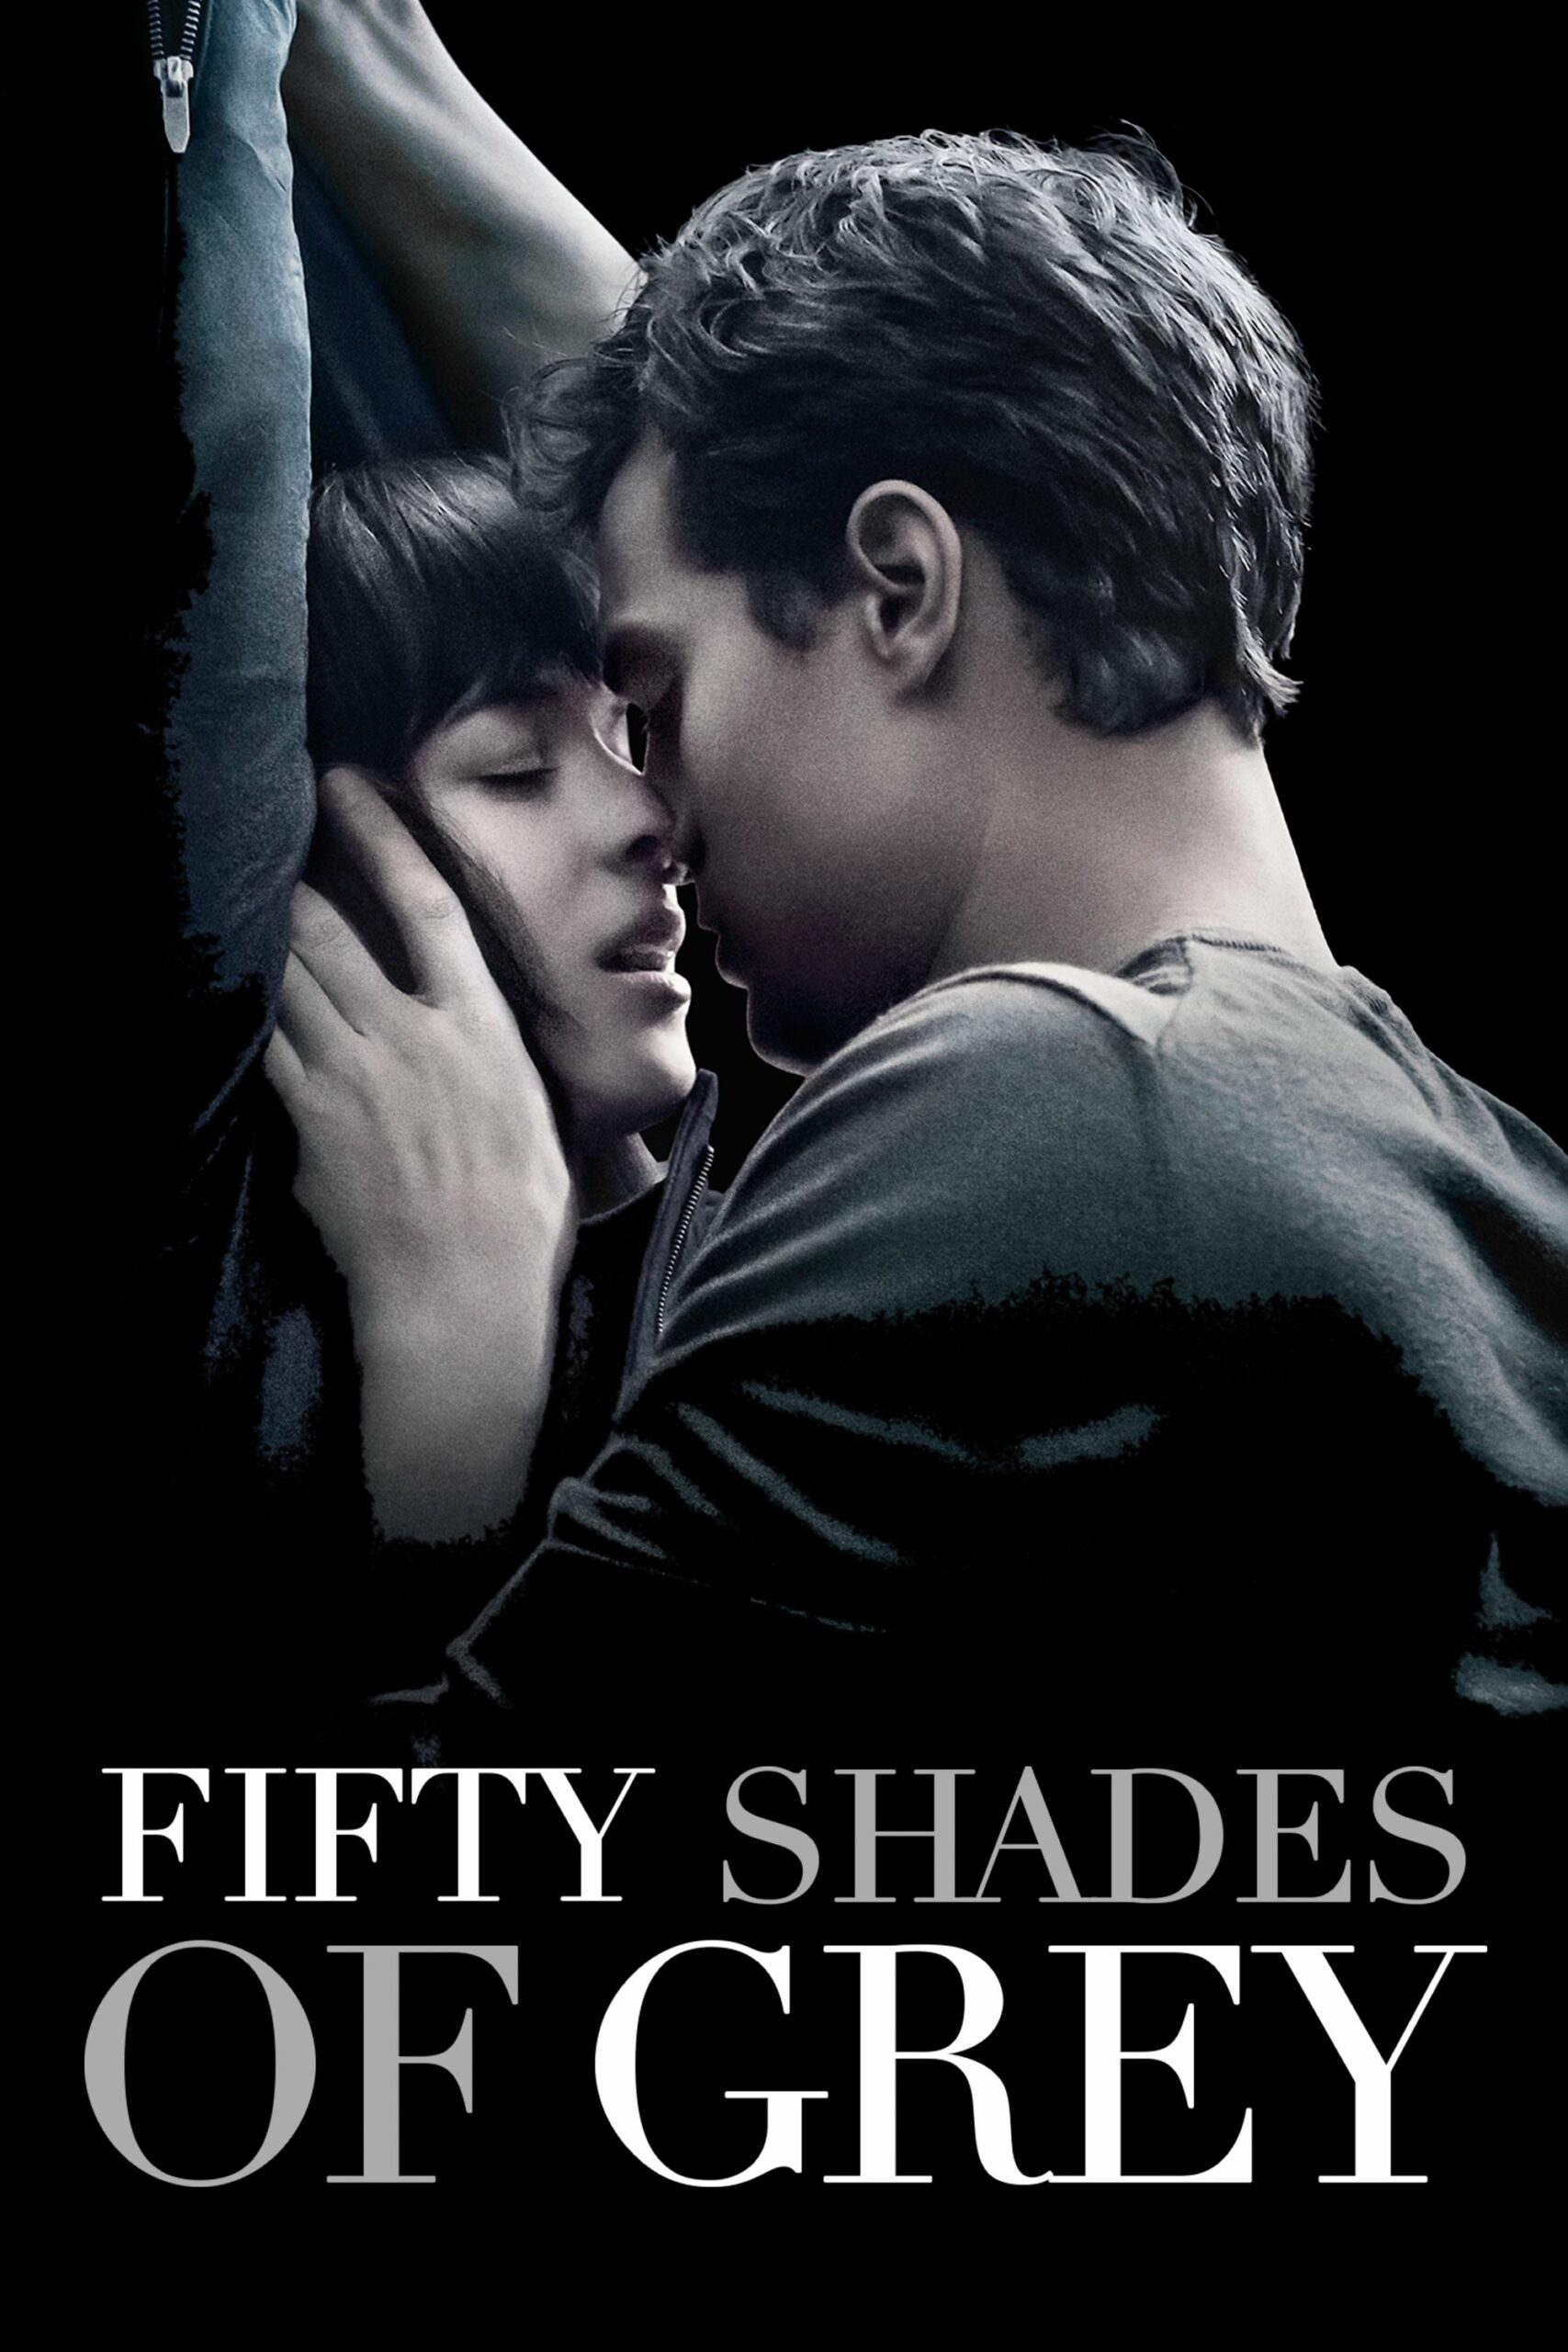 Fifty Shades of Grey Hollywood Movie scaled